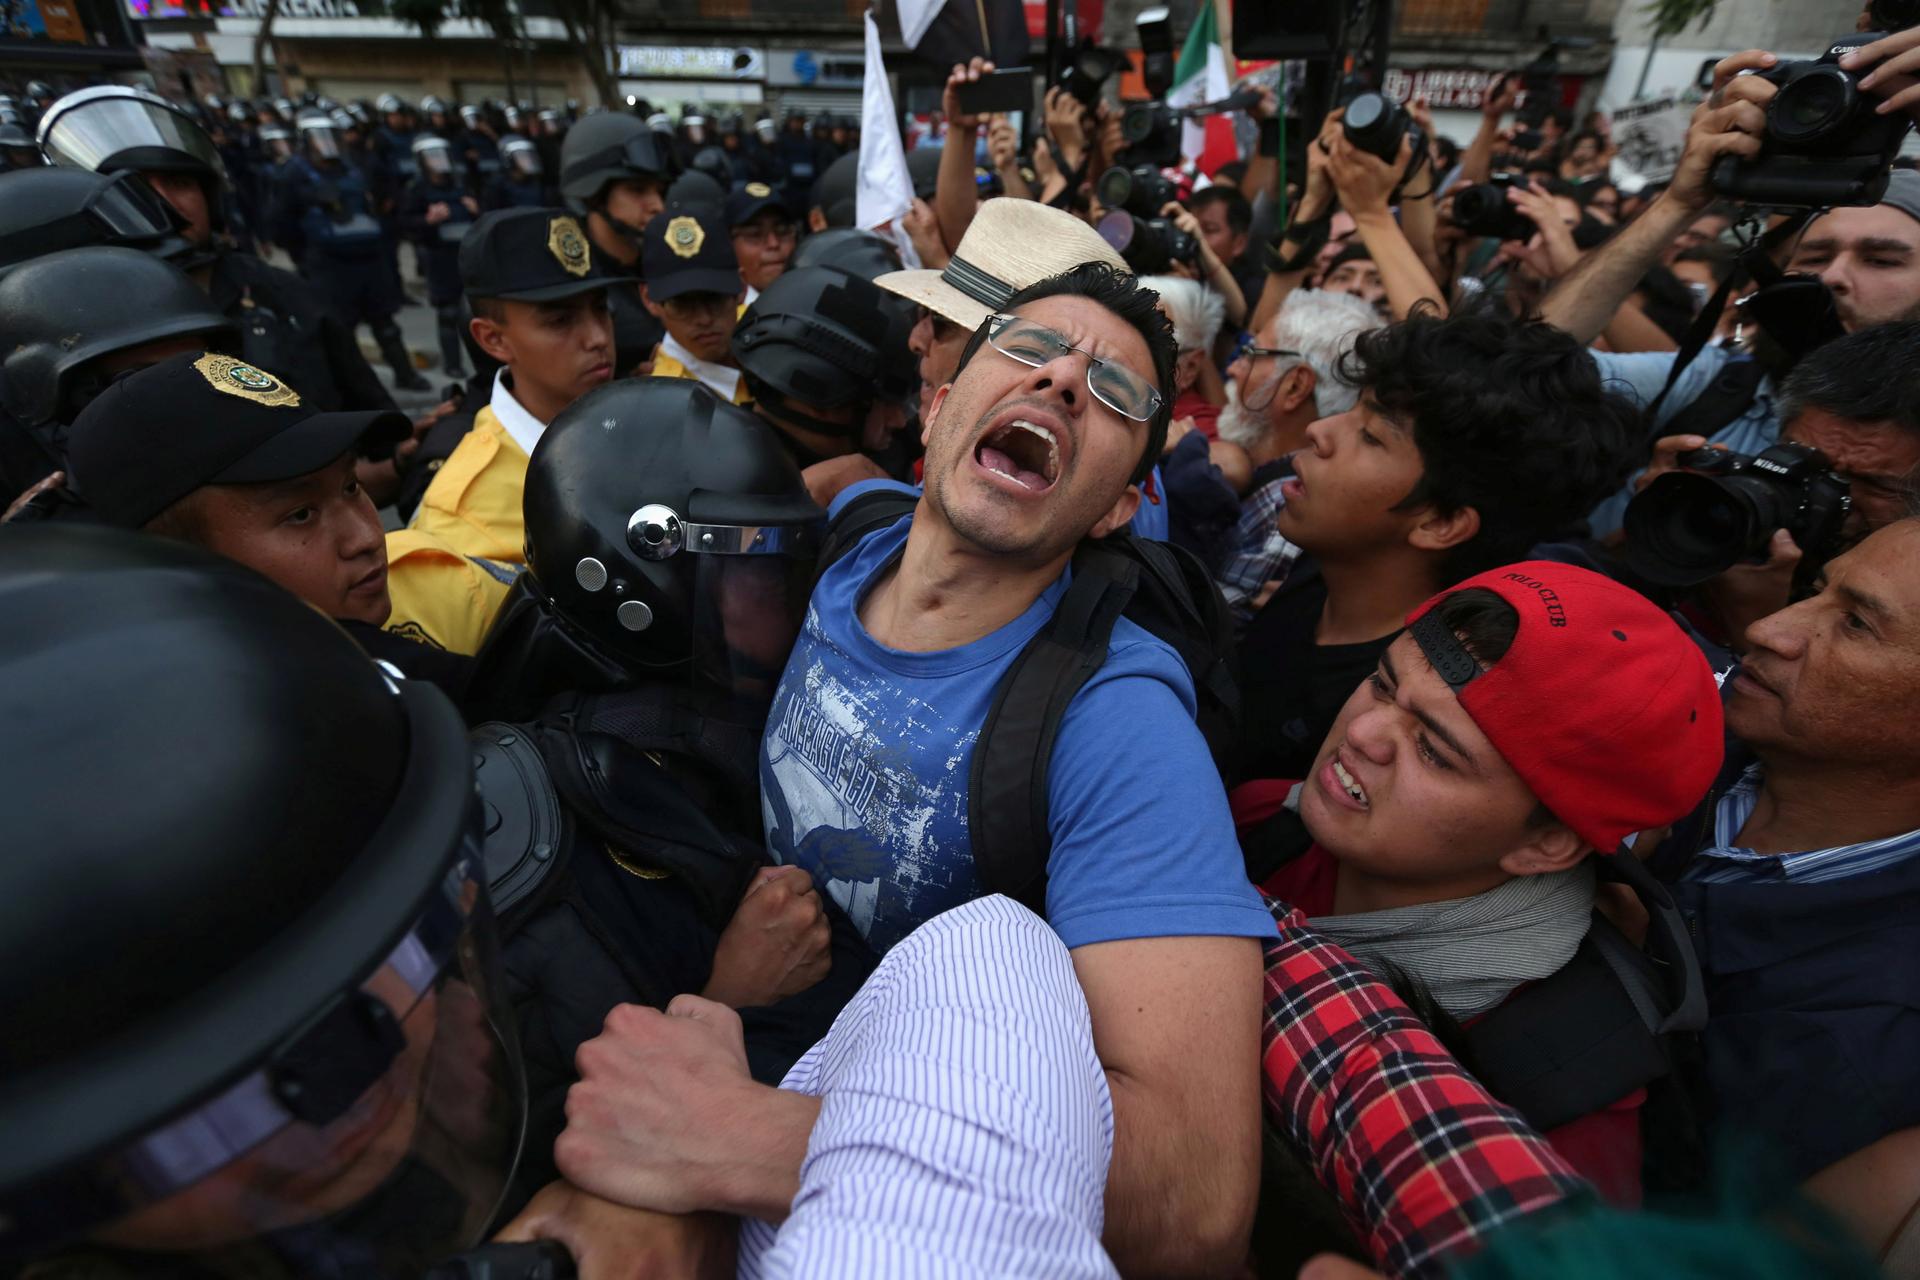 Demonstrators clash with riot police as they take part during a march demanding the resignation of President Enrique Pena Nieto in downtown Mexico City, Mexico, September 15, 2016.